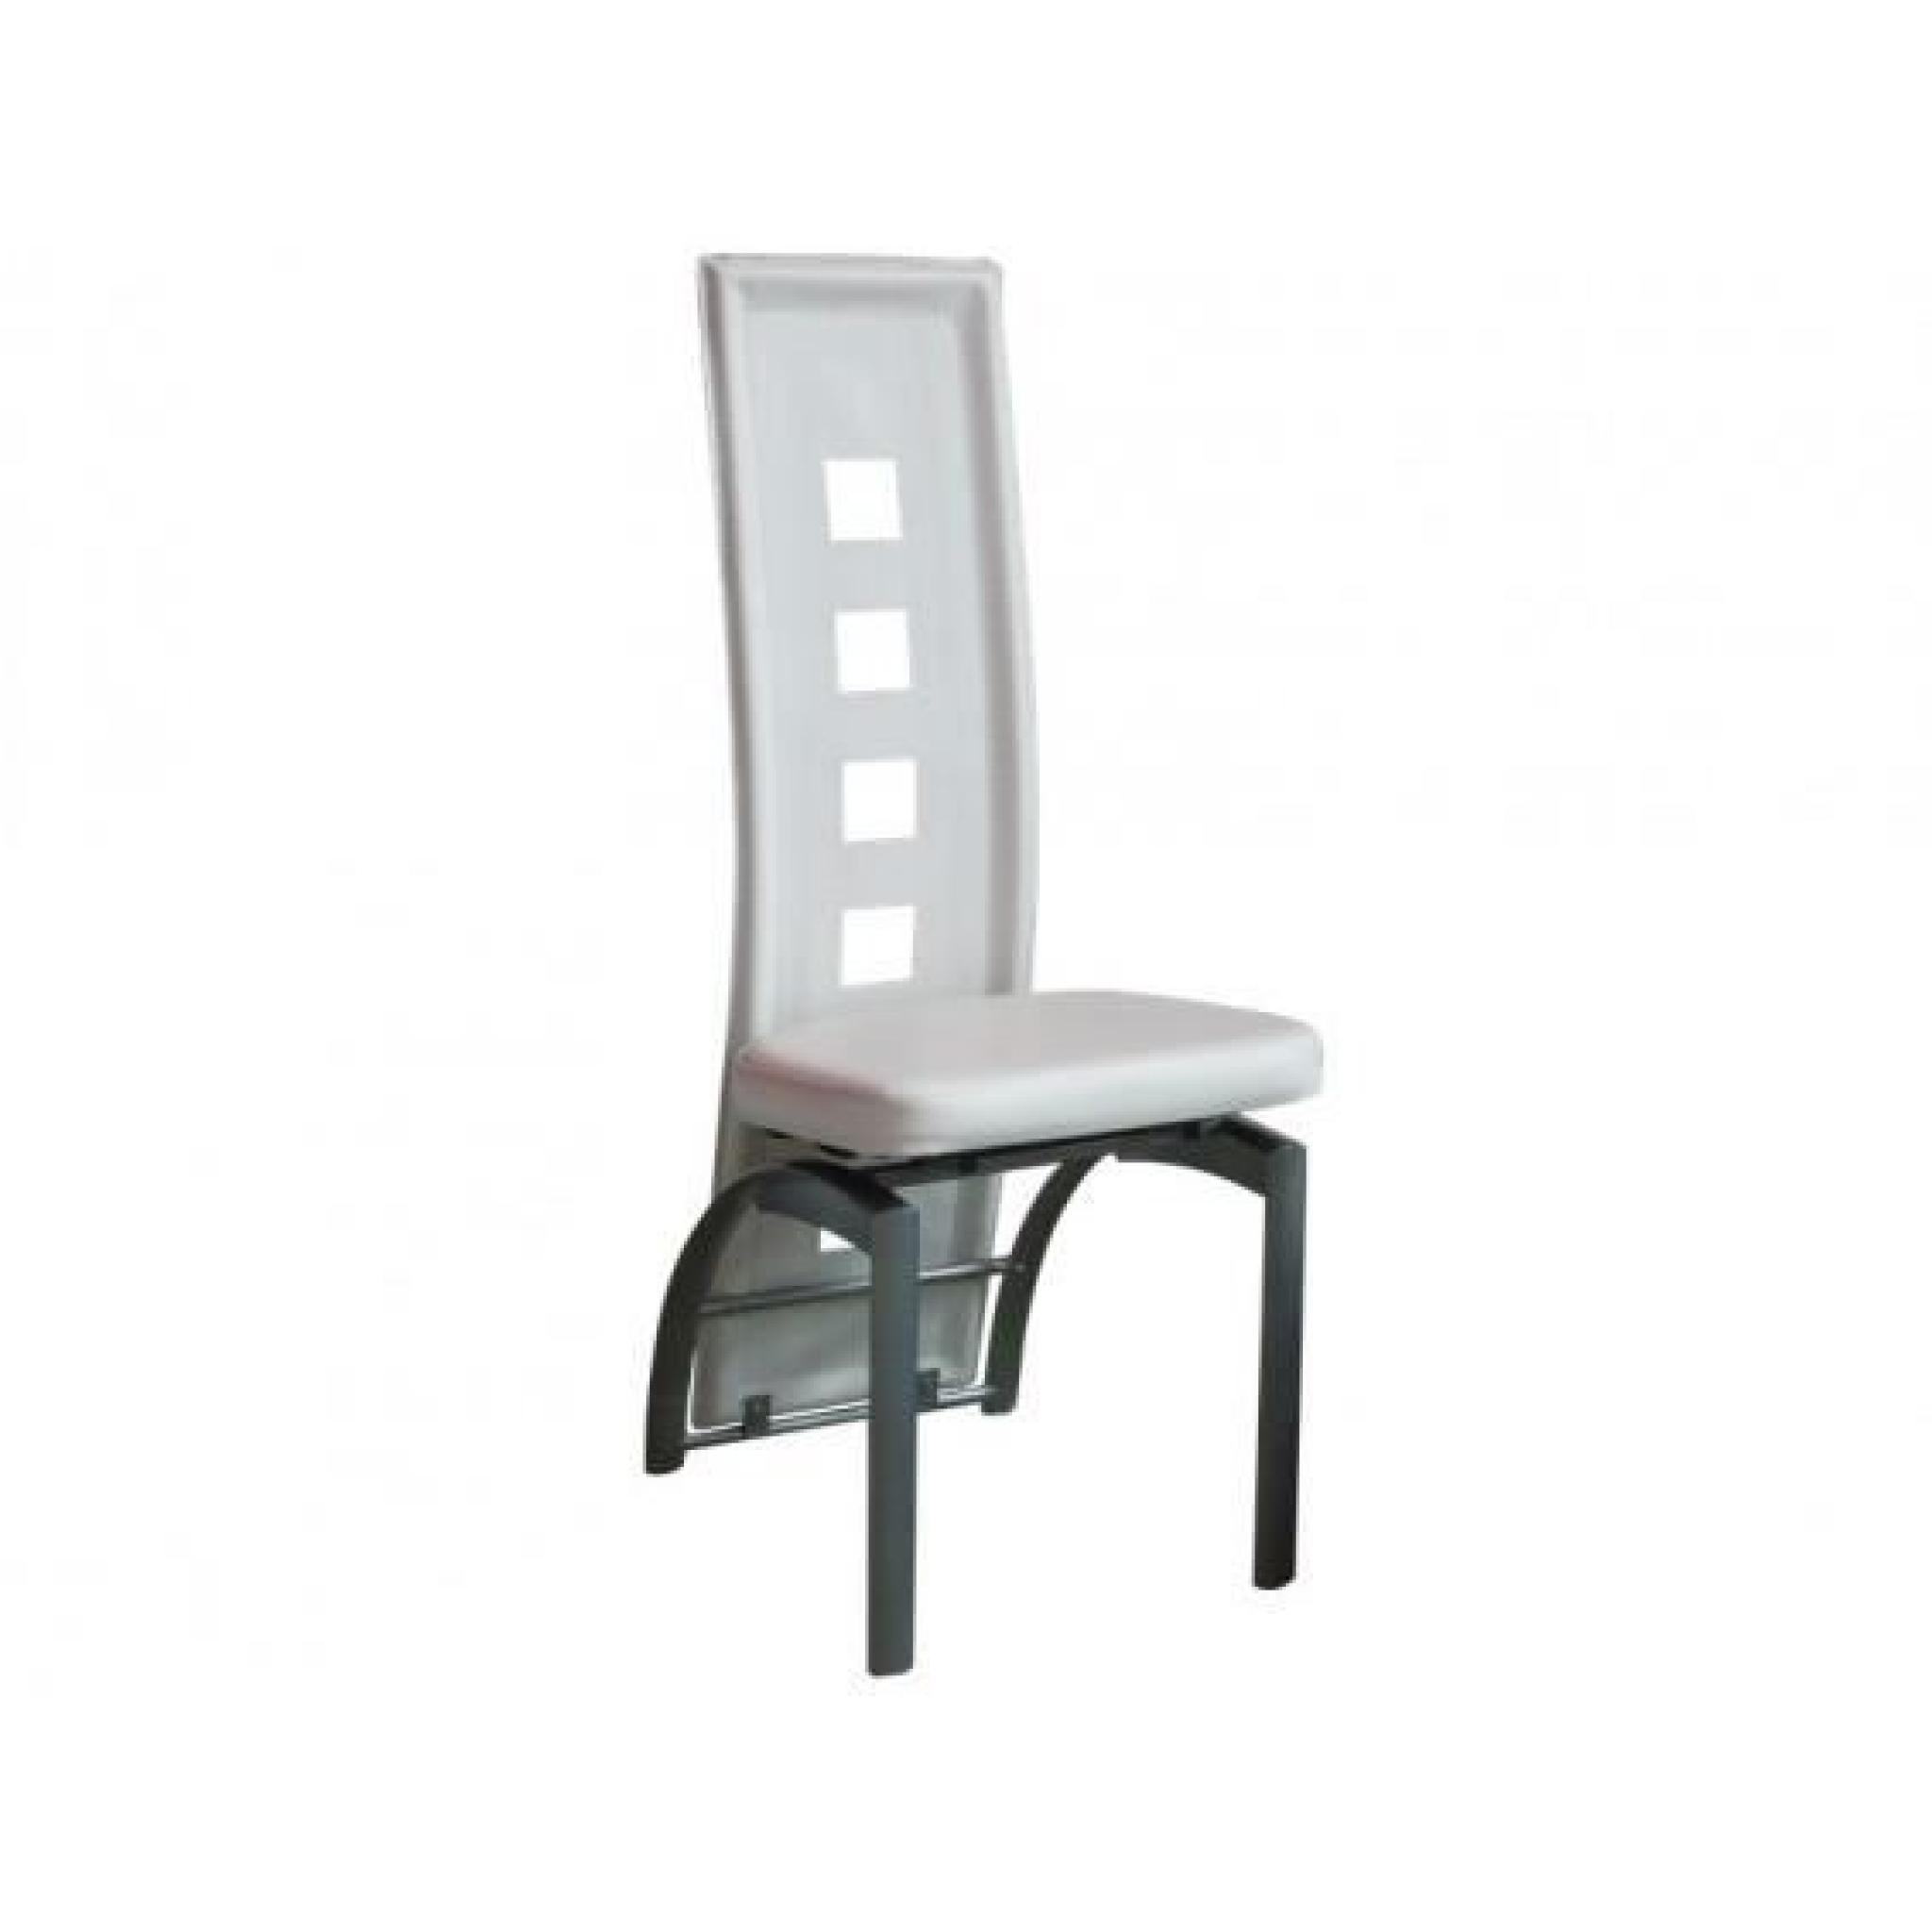 Eve - Lot 4 Chaises Blanches pas cher